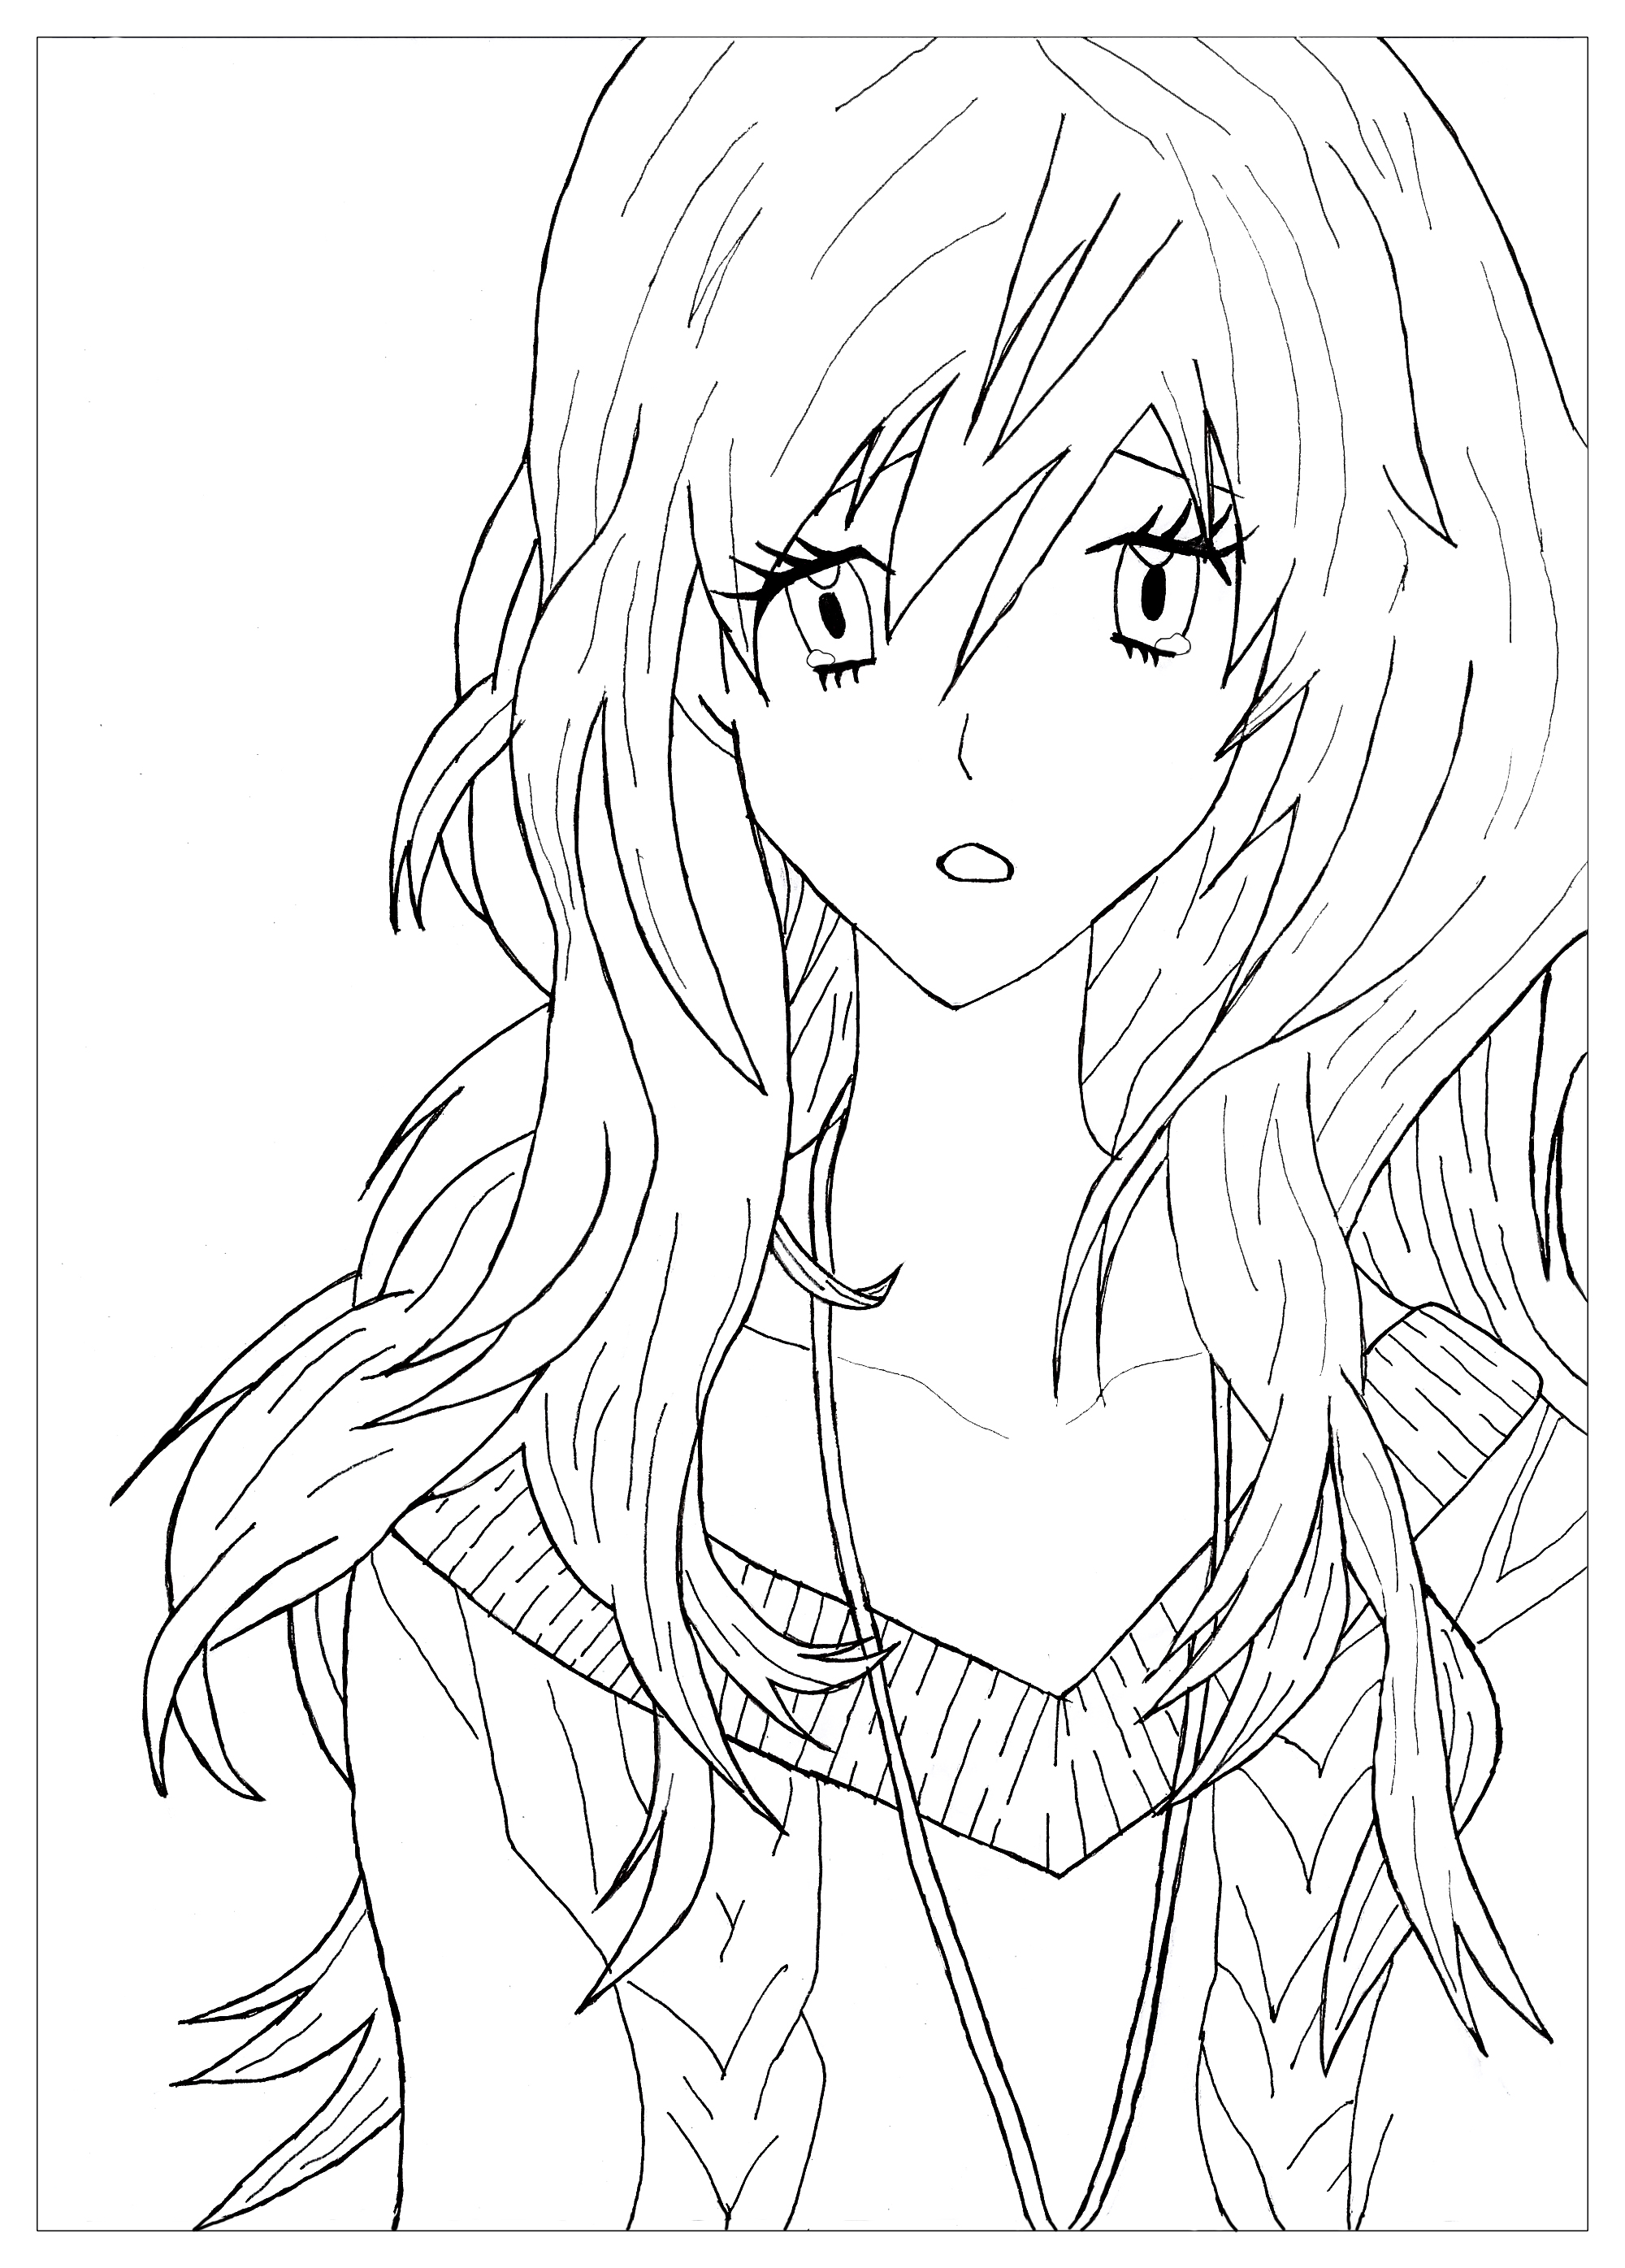 Anime Coloring Book | AdultcoloringbookZ